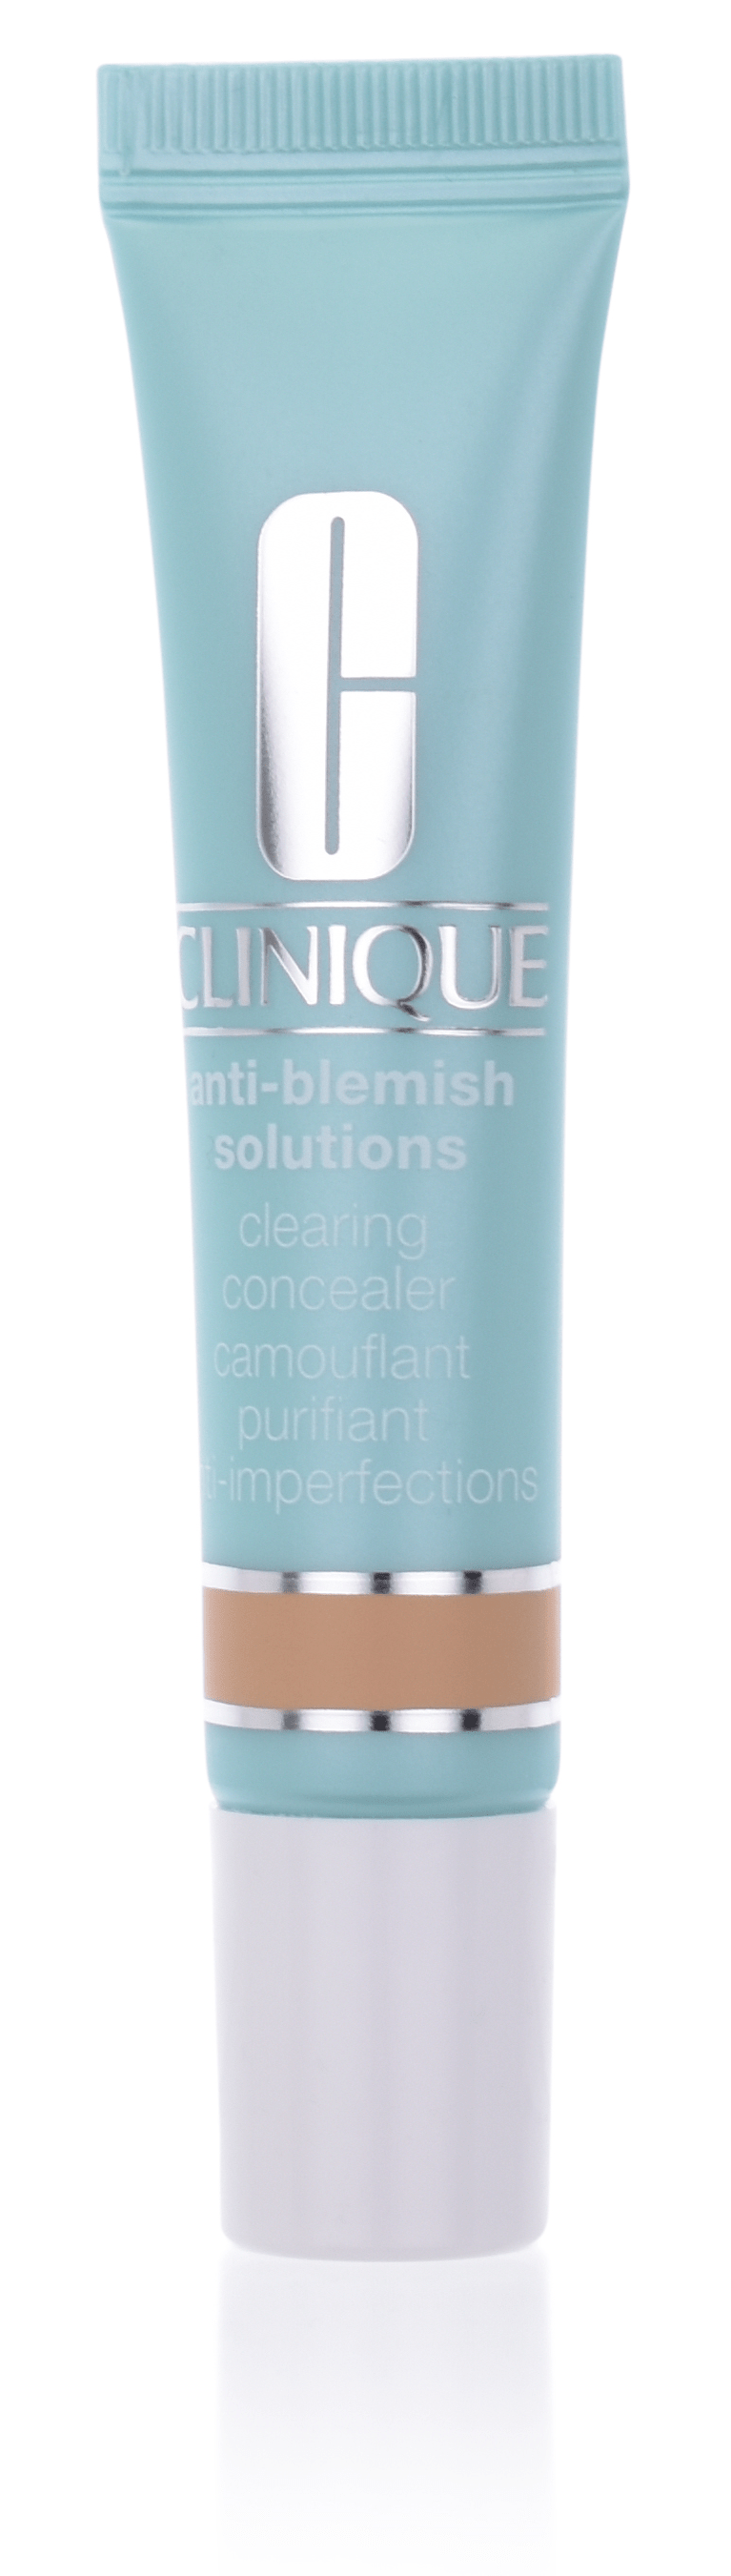 Clinique Anti-Blemish Solutions Clearing Concealer 10 ml - Shade 2